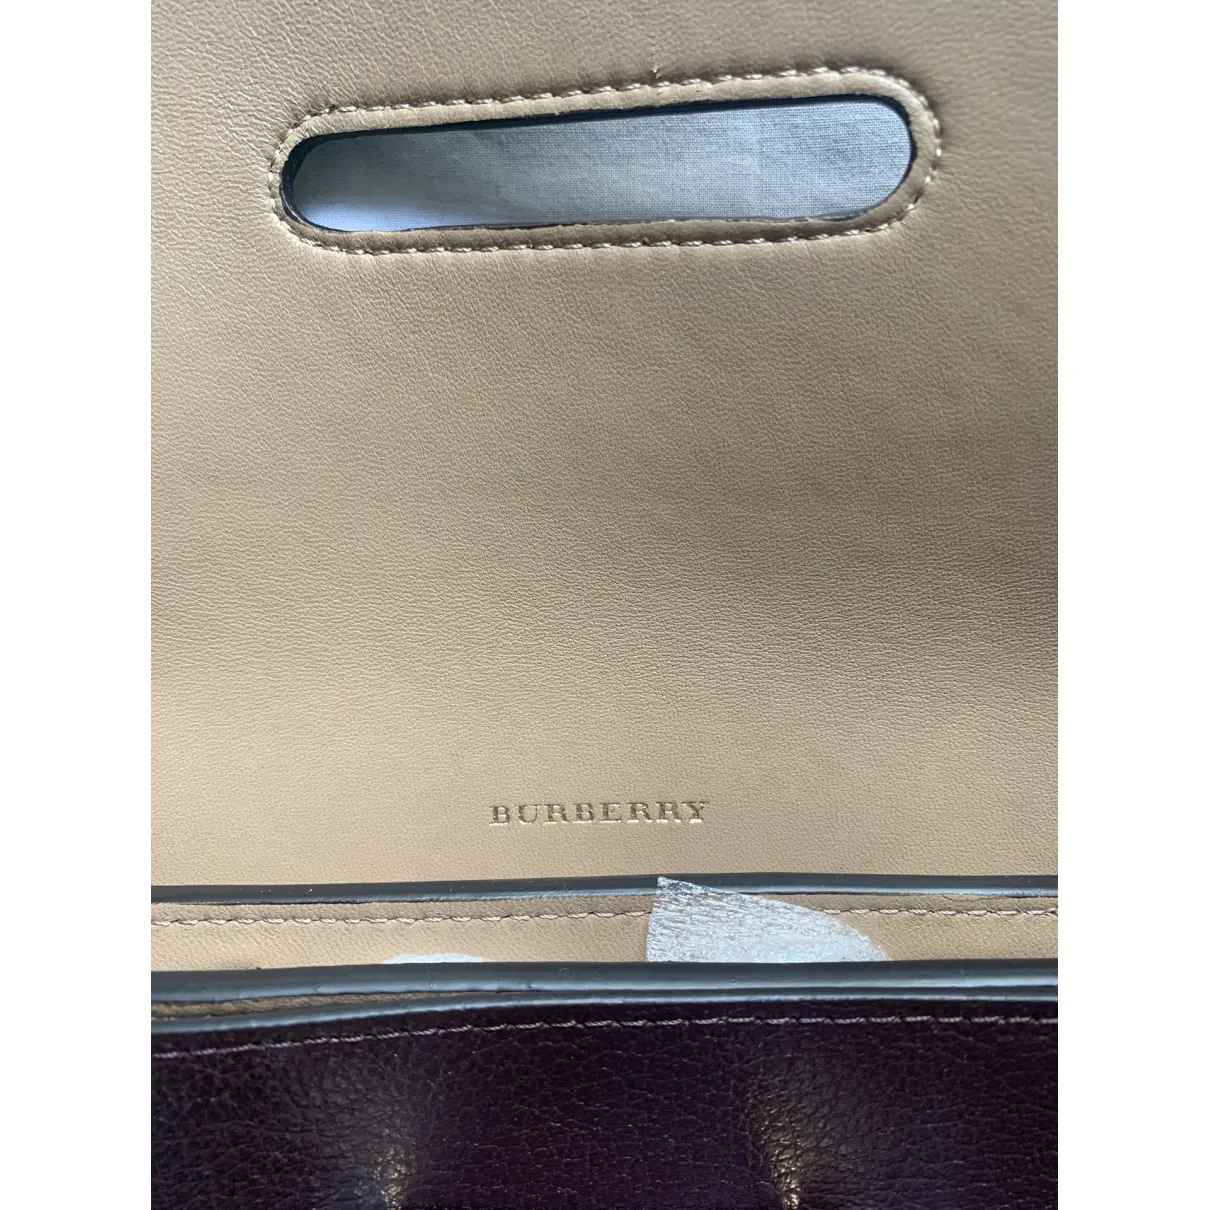 The D-ring leather mini bag Burberry